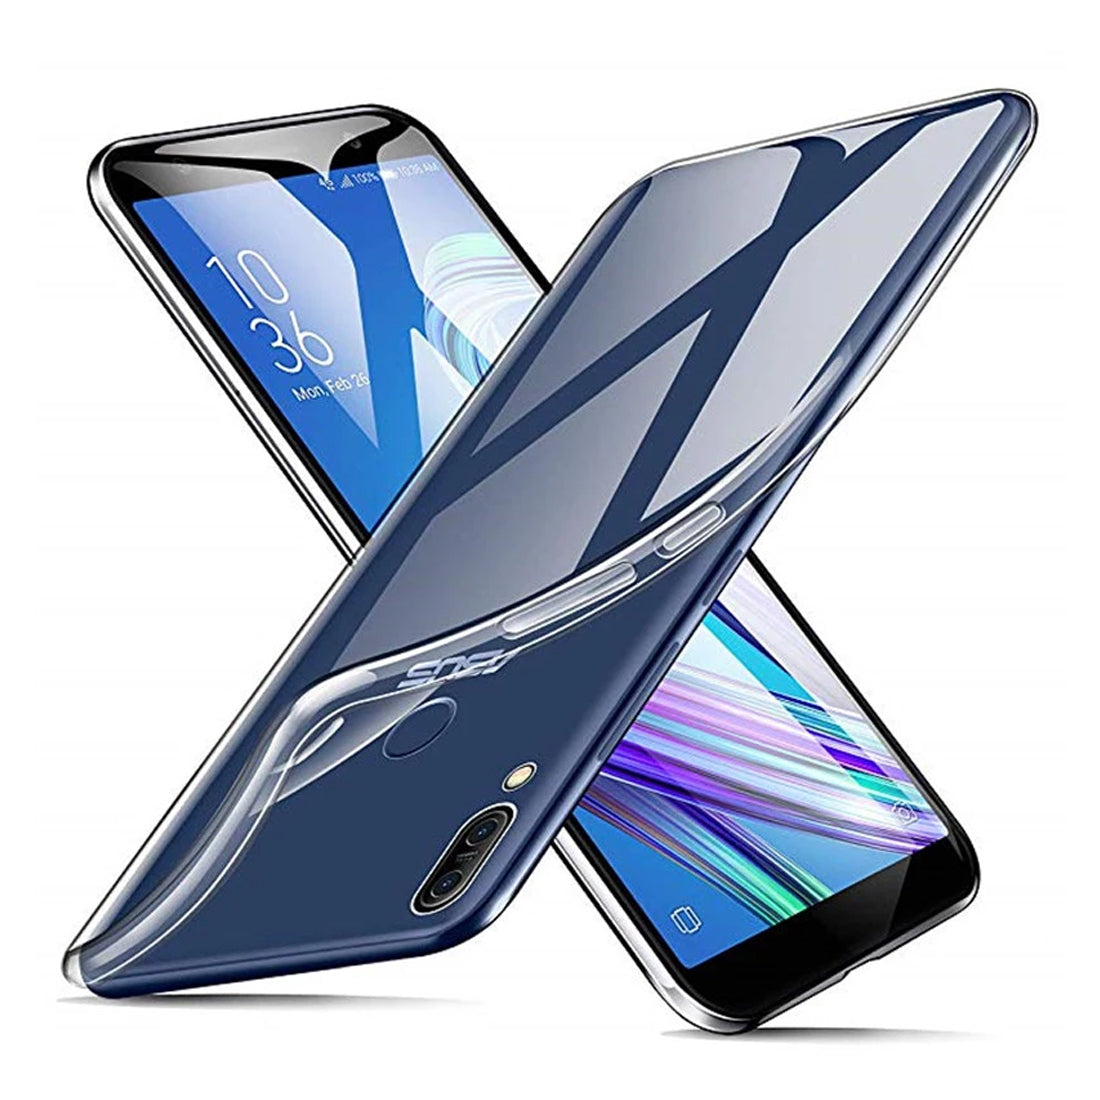 Clear Case for Asus Zenfone Max Pro M1